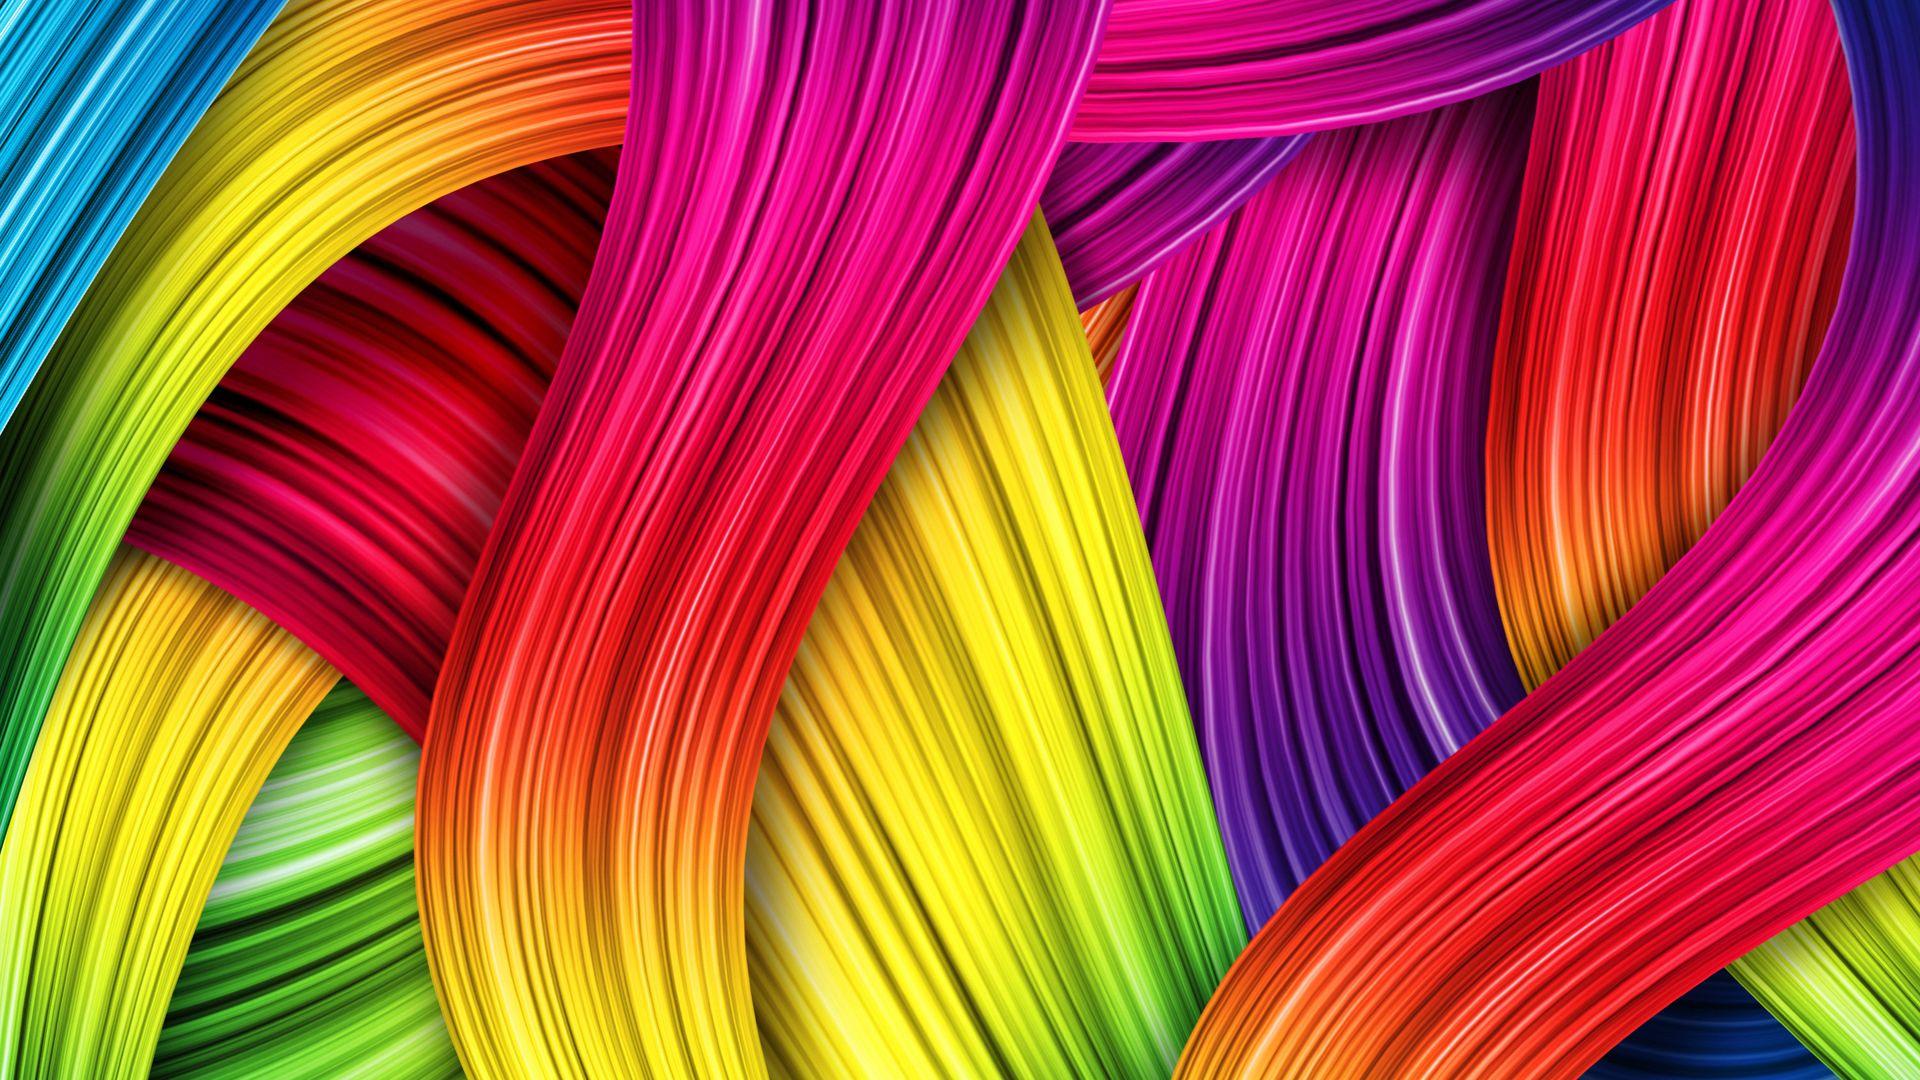 Colorful Desktop Background. Related Post To Colorful